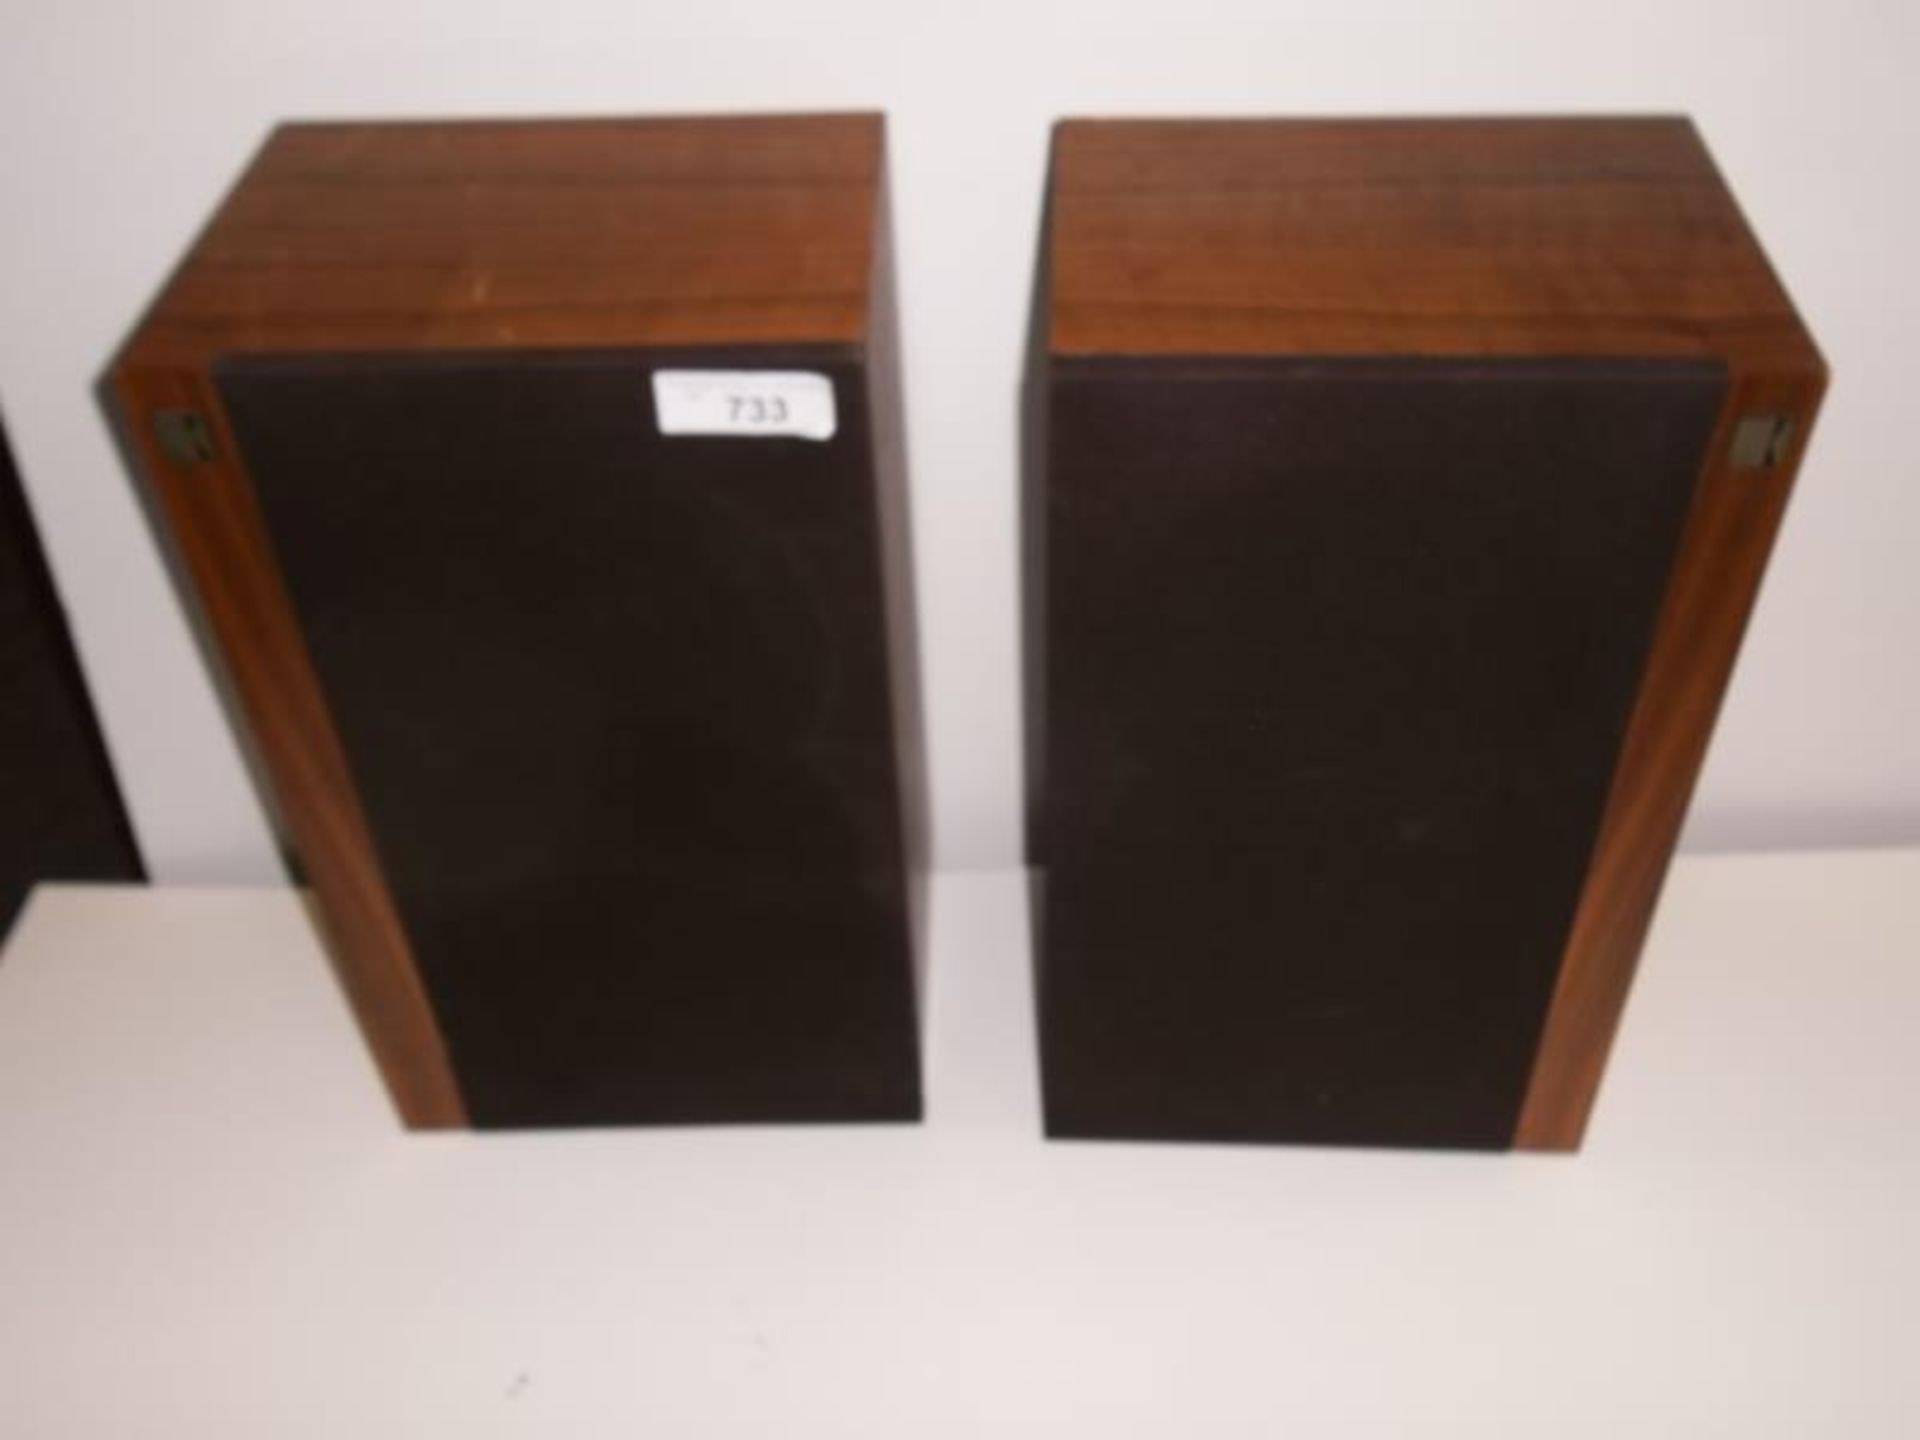 2 KEF Speakers, model 2497, 2498, Corelli, type SP1051, minor scratches on wood, 8 3/4" x 11" x 18 - Image 5 of 5